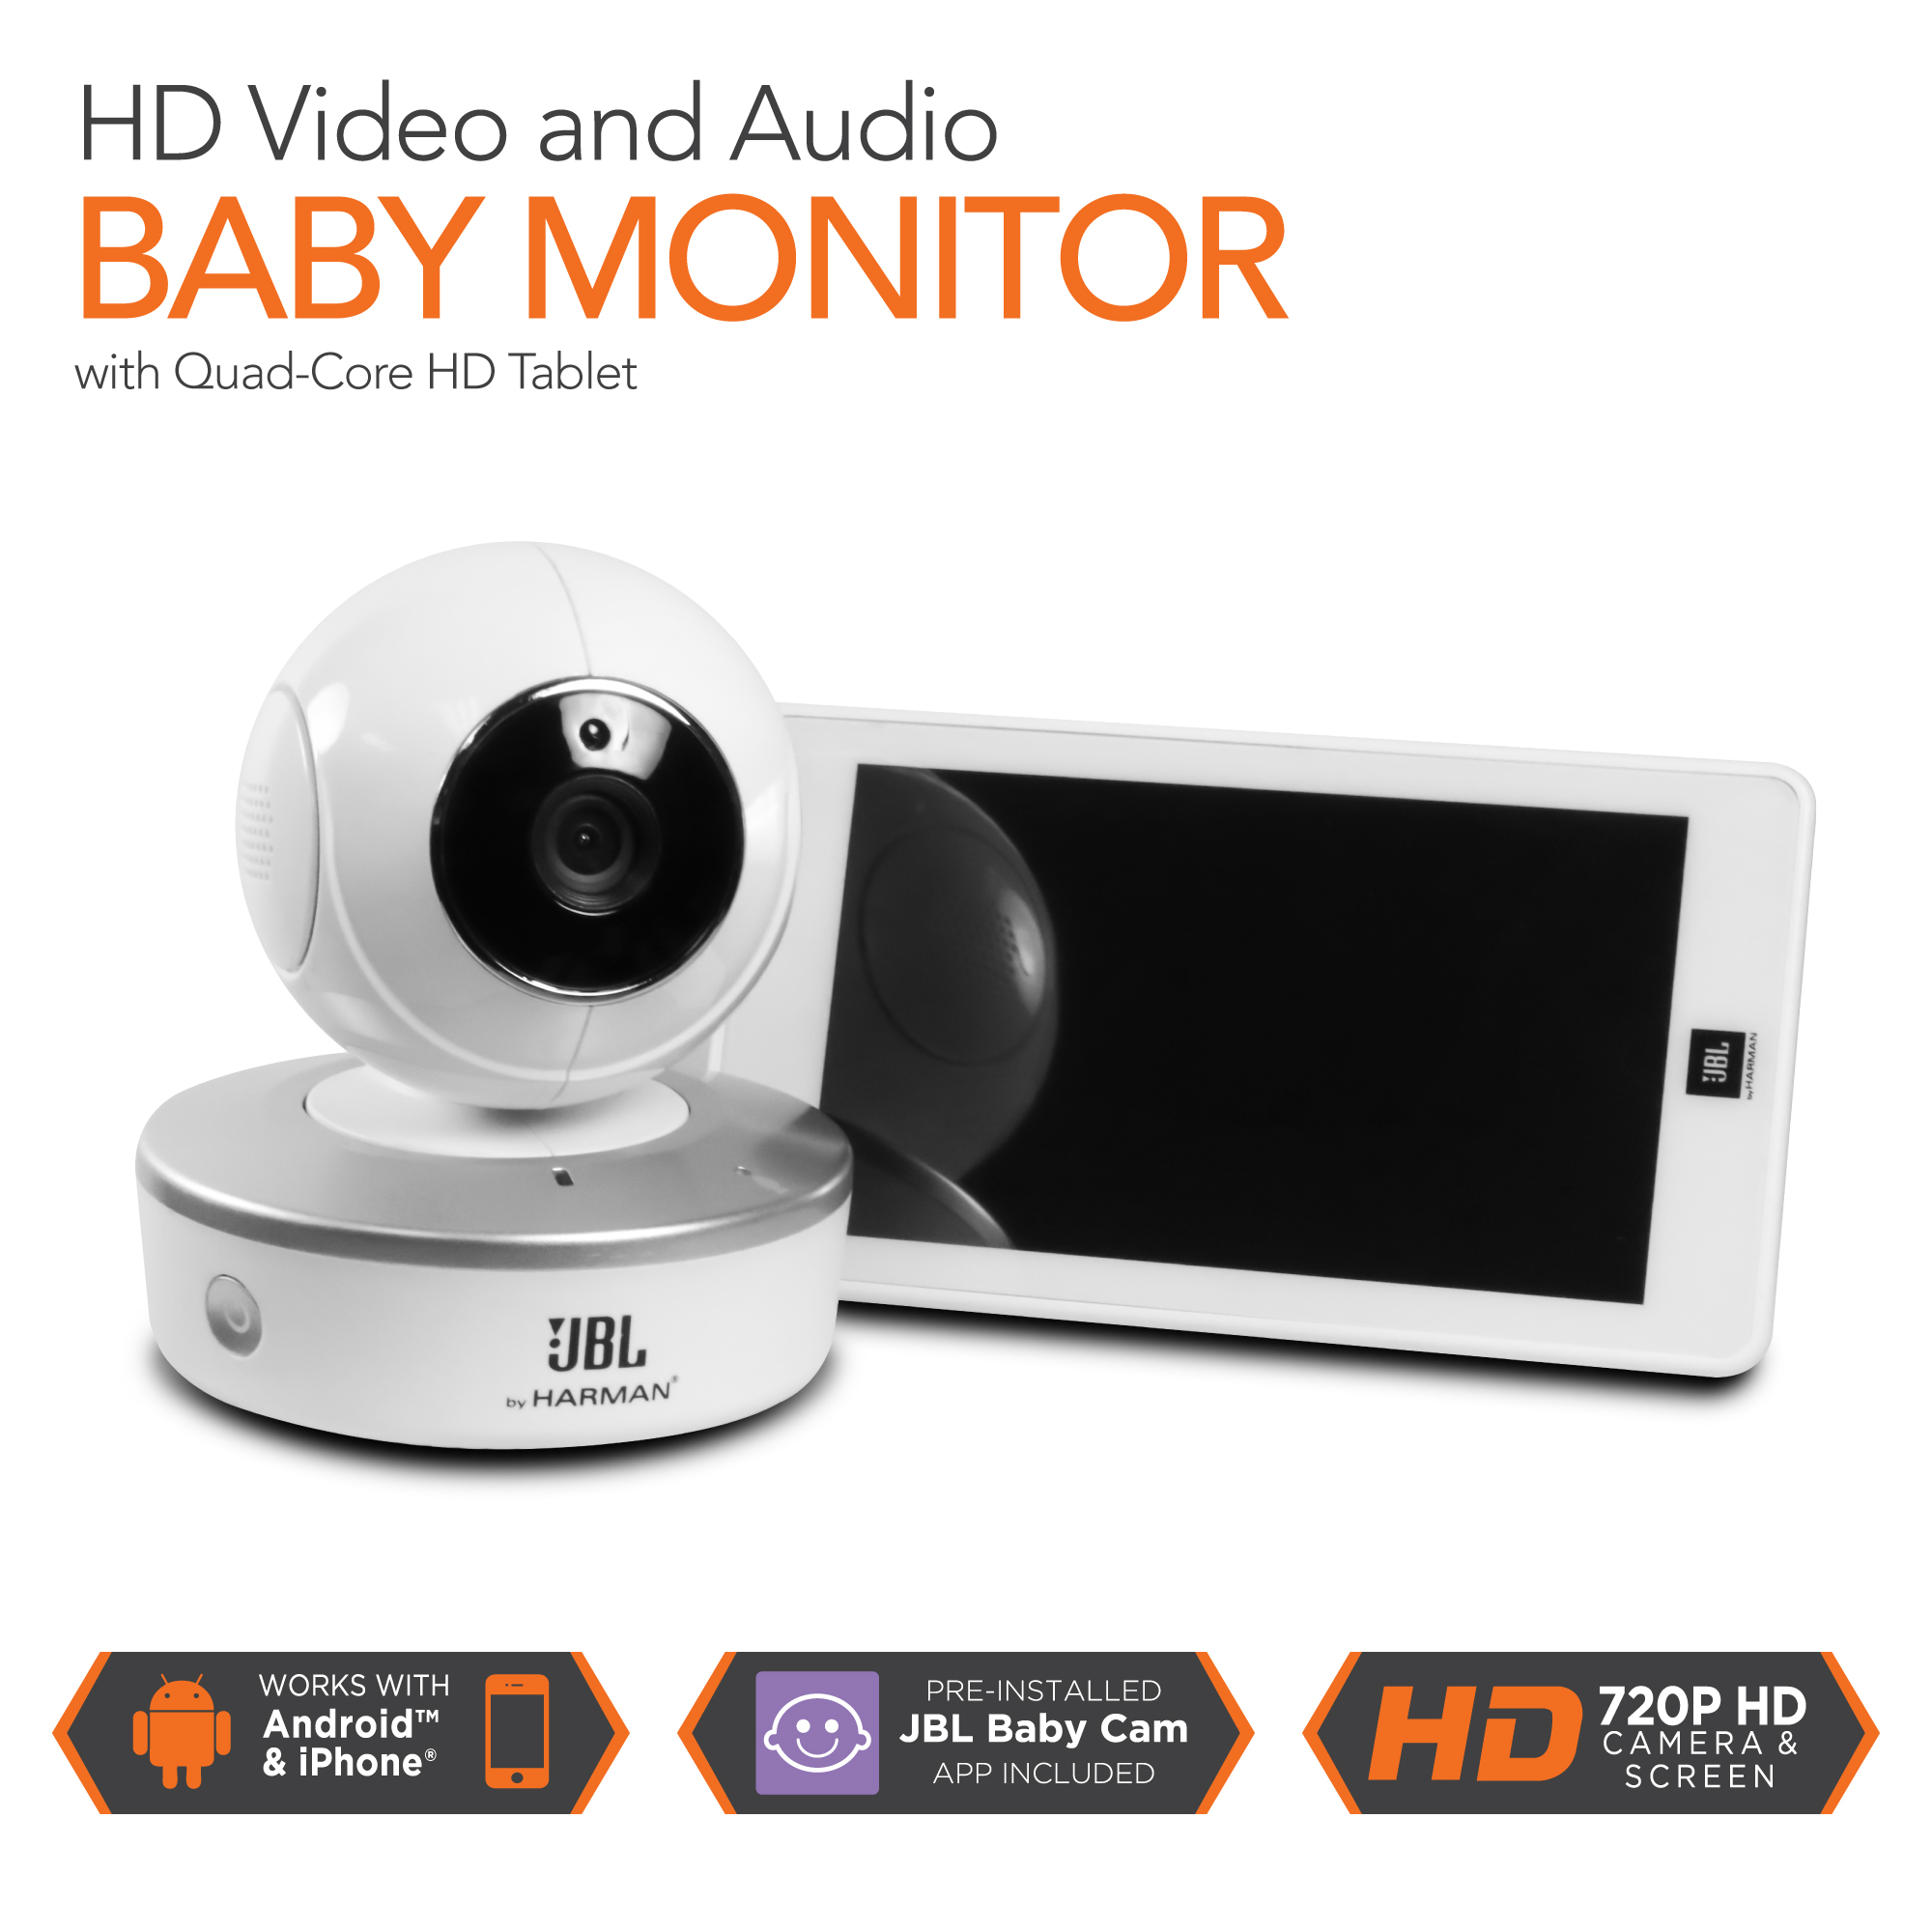 Ematic JBL EBM104JB Quad-Core HD with Baby Monitor - image 4 of 10